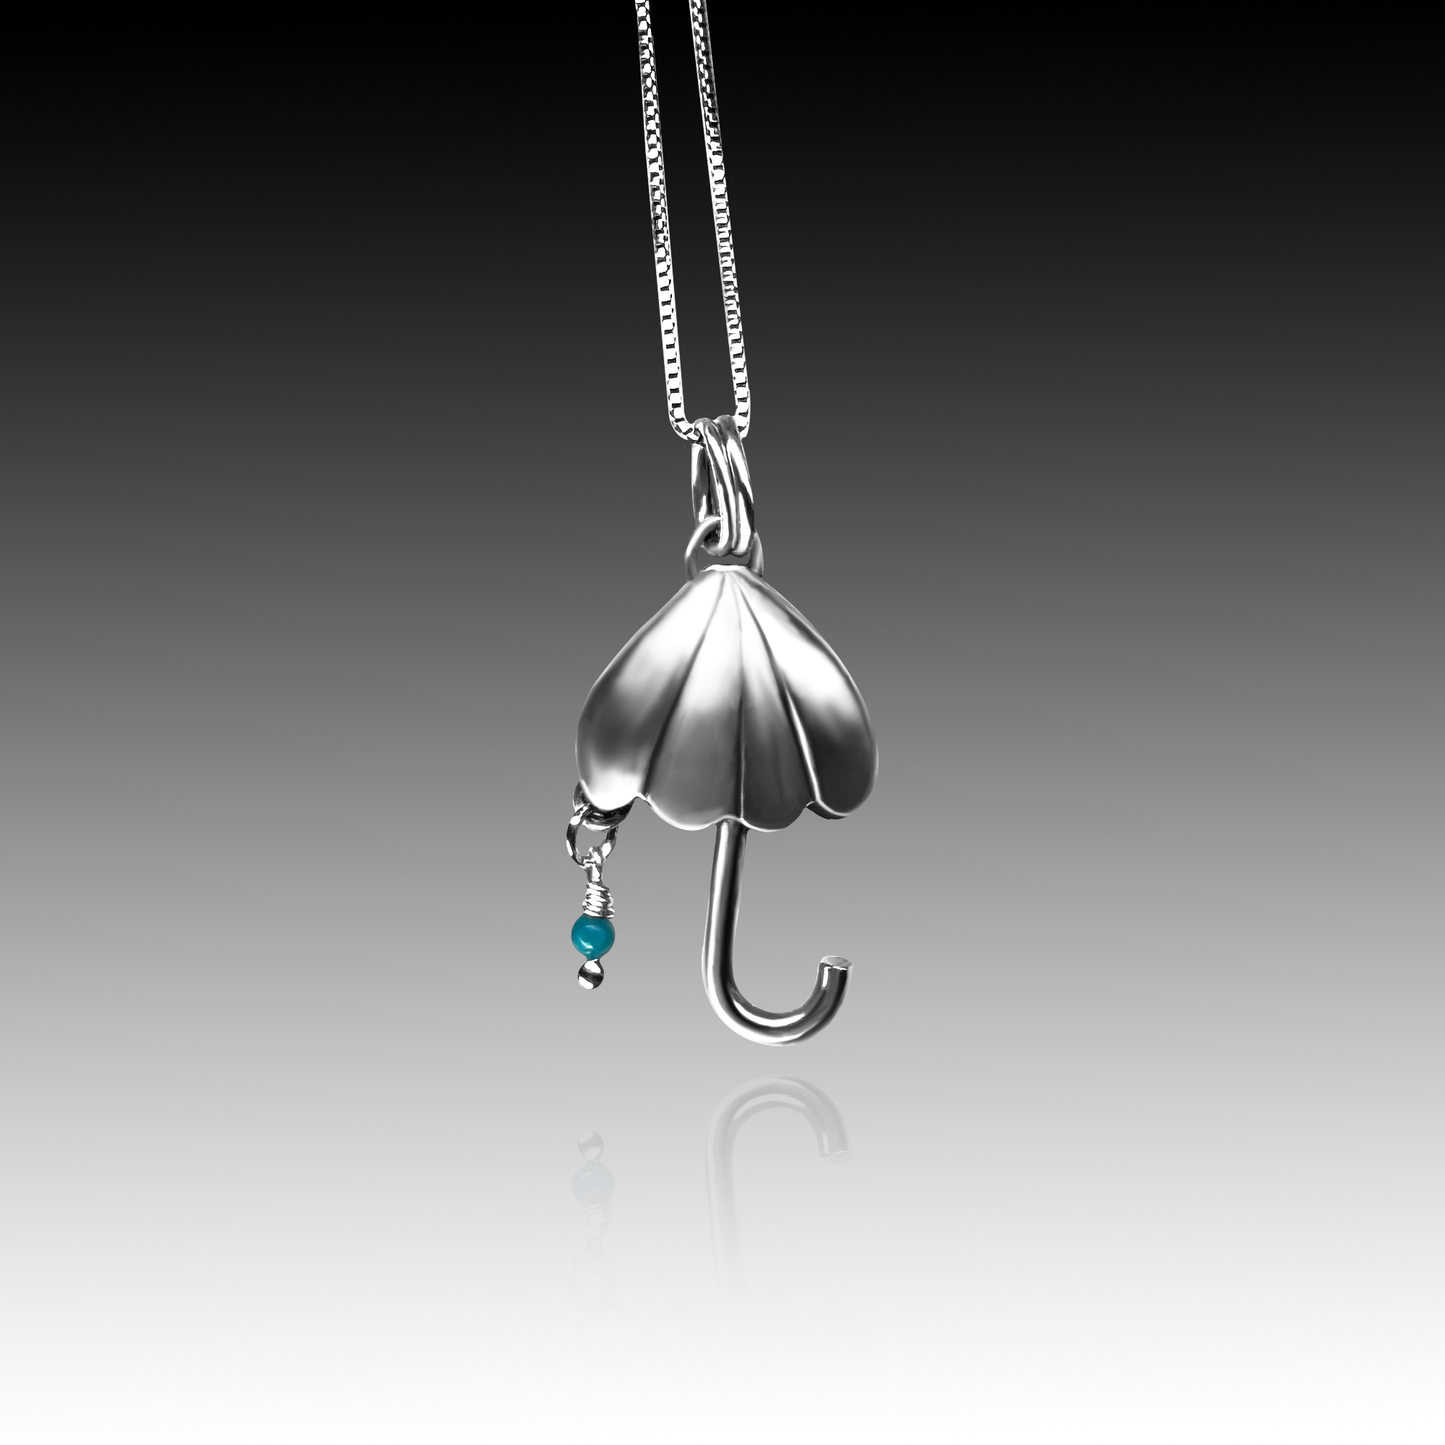 "Naya" Turquoise & Sterling Silver Umbrella Necklace